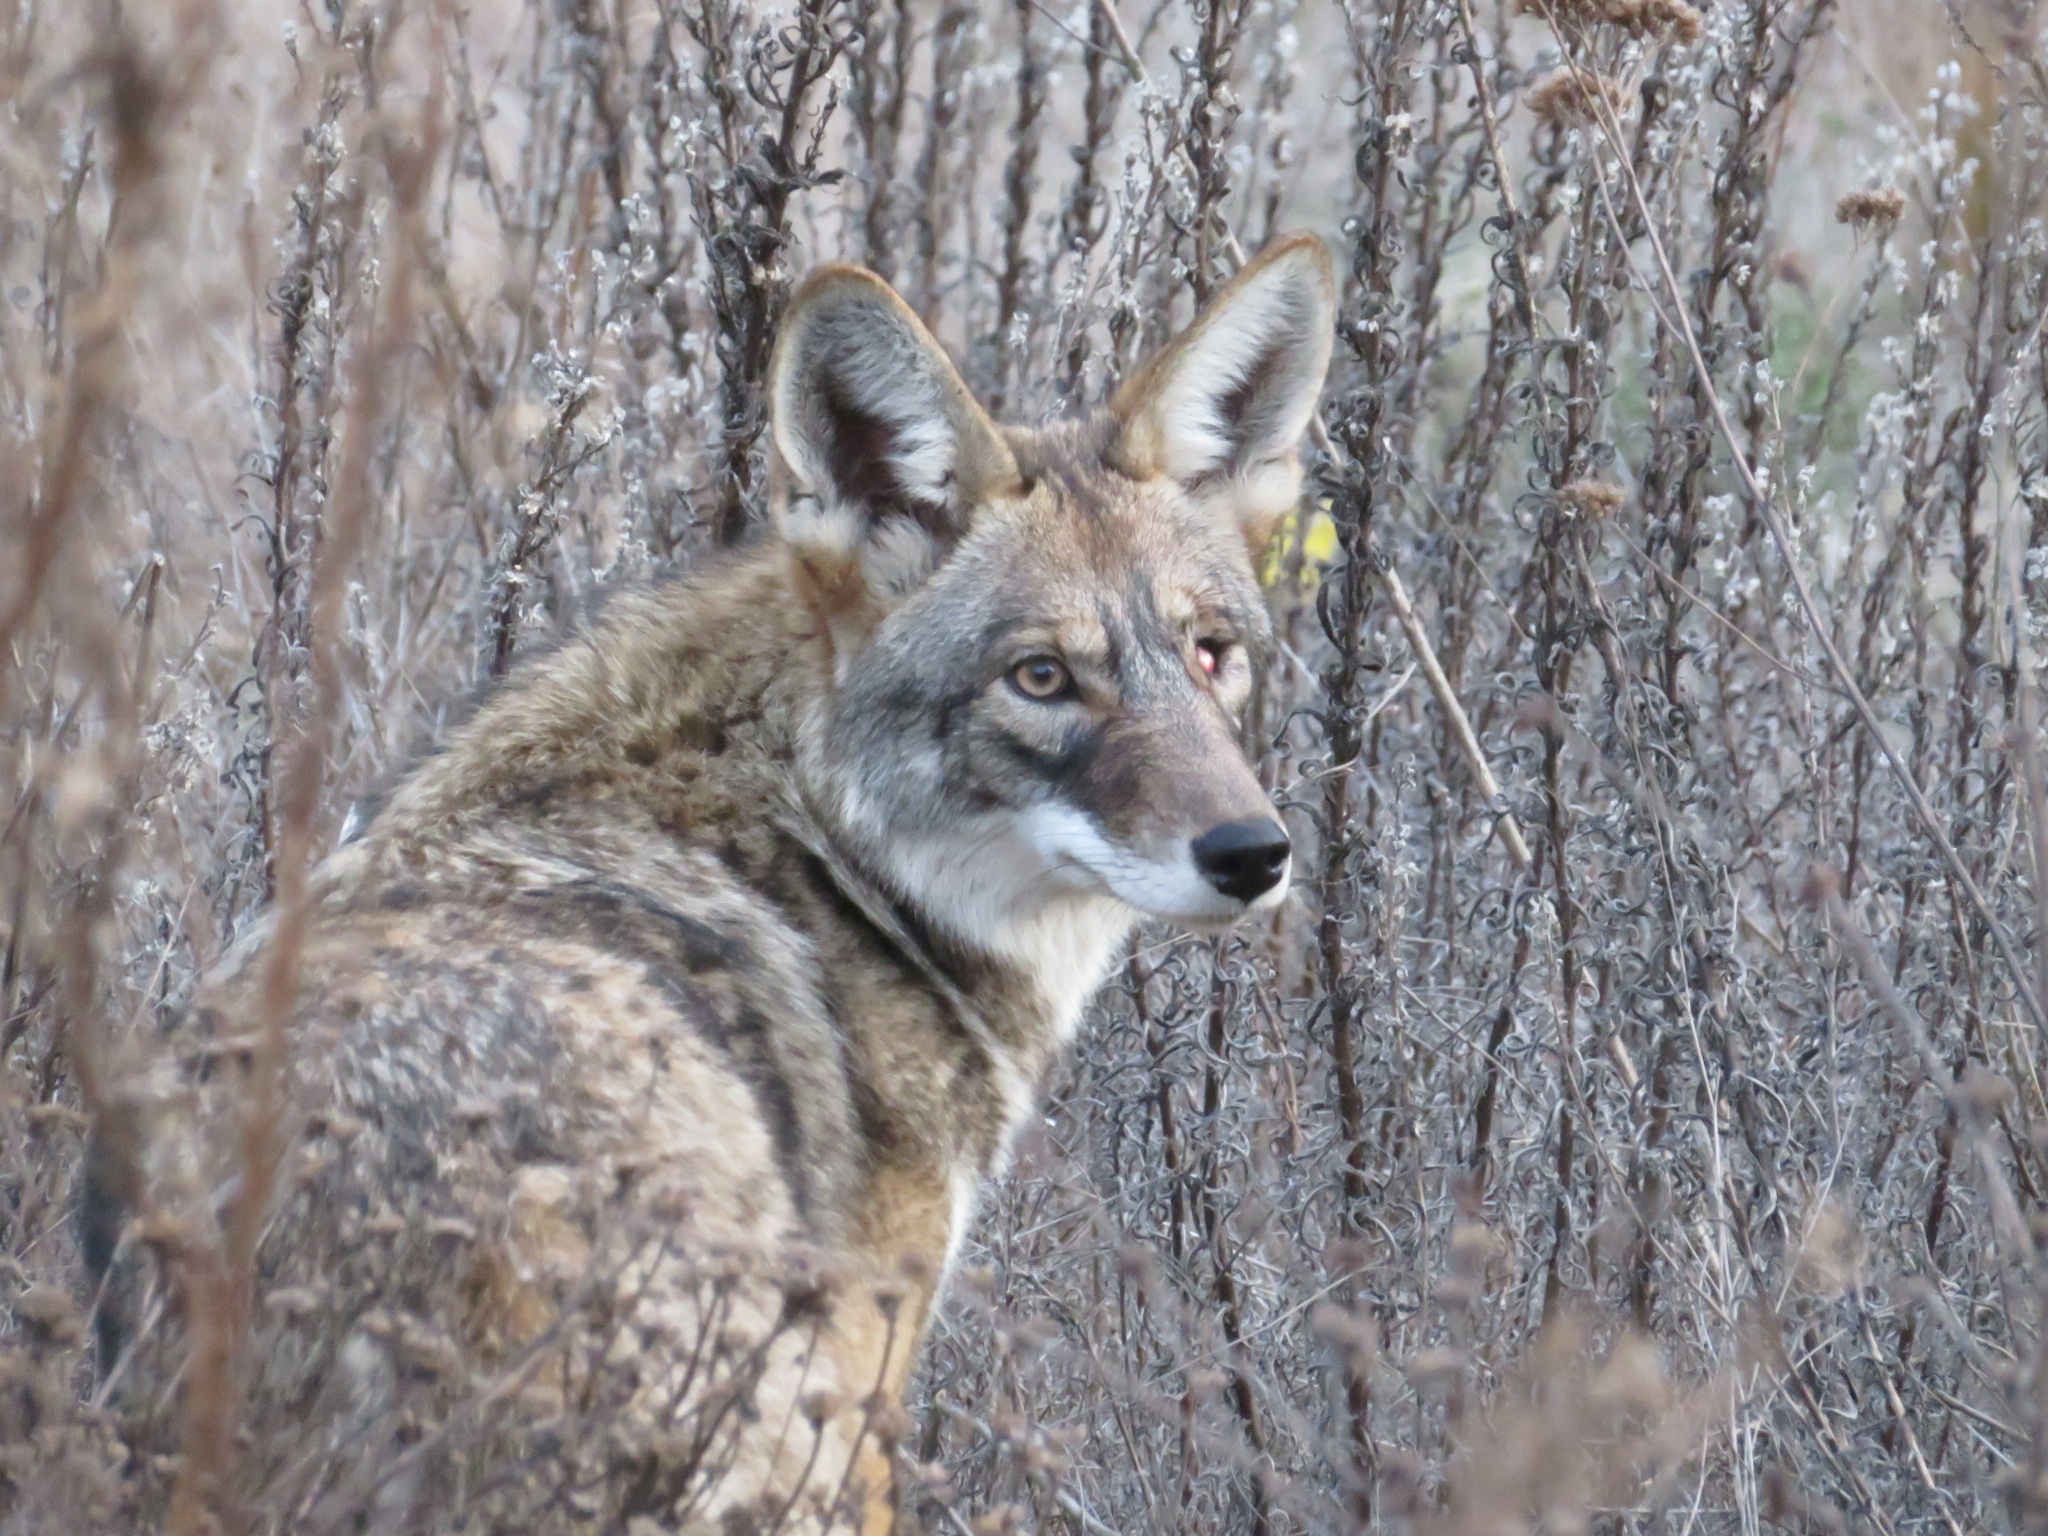 a close-up of coyote sitting in brush that matches the greys and browns of its fur